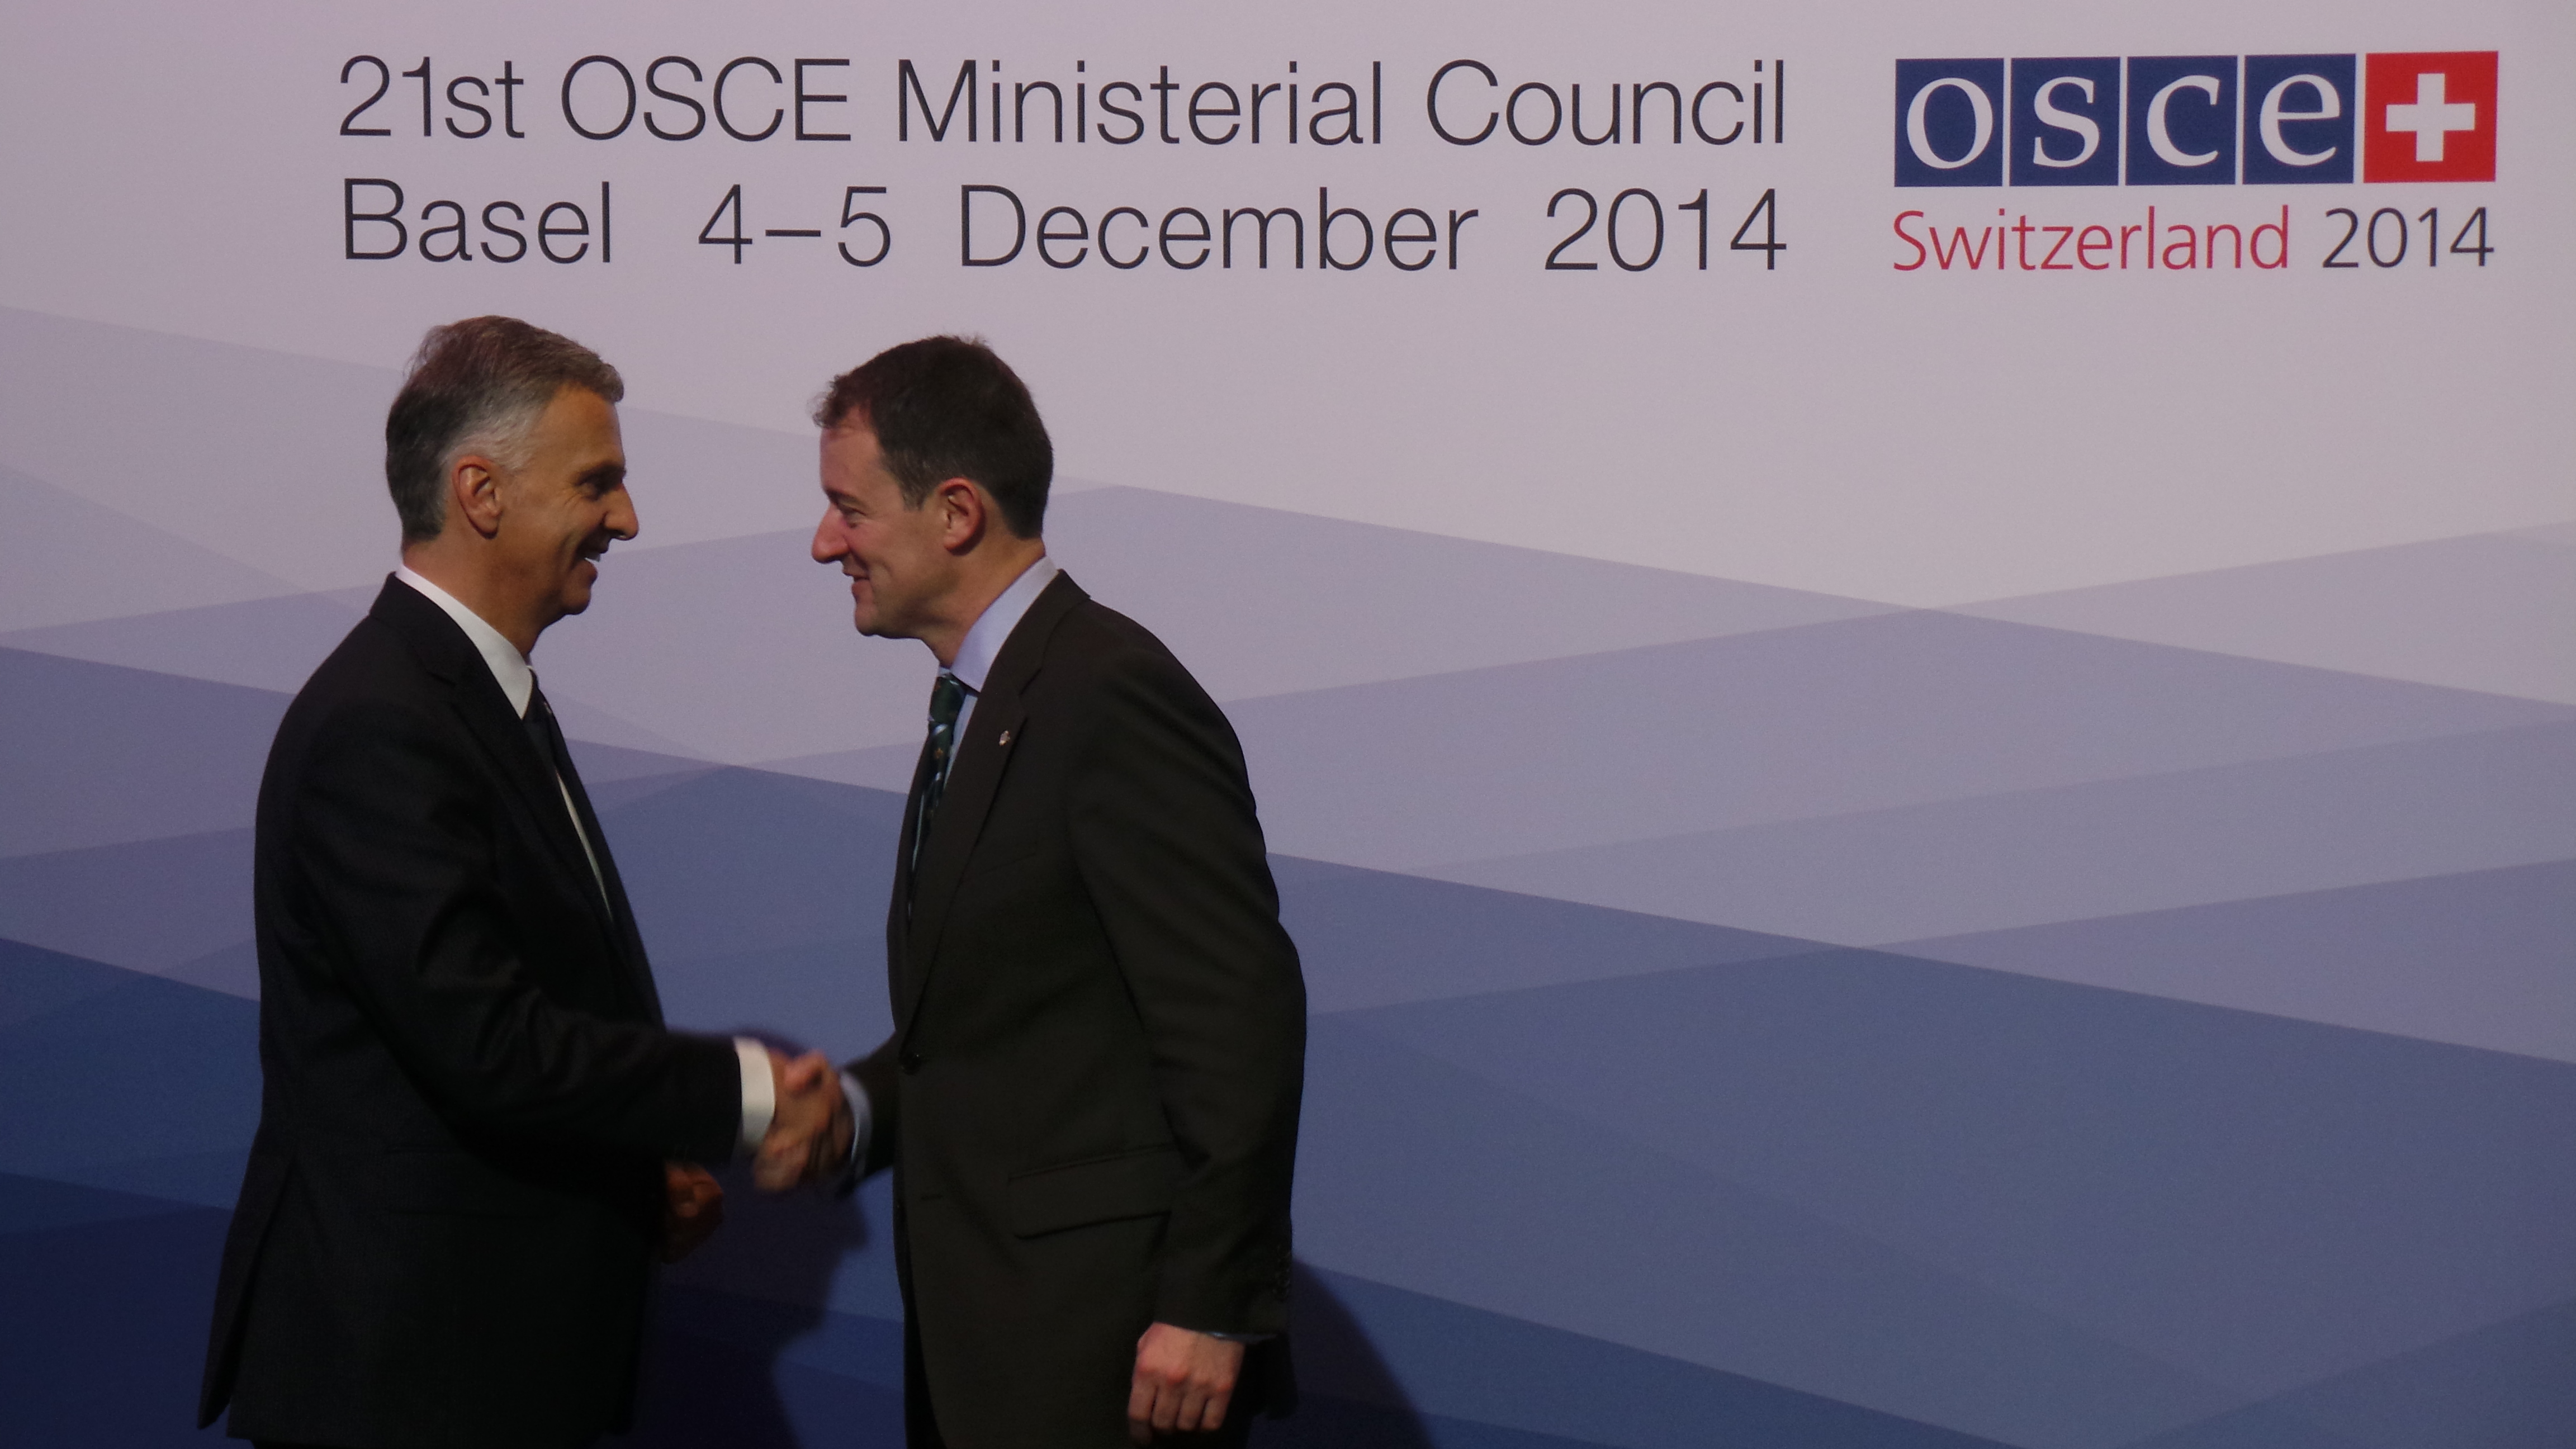 The President of the Swiss Confederation, Didier Burkhalter, greets Seán Sherlock, Minister for Development, Trade Promotion and North-South Cooperation in Ireland at the OSCE Ministerial Council 2014 in Basel